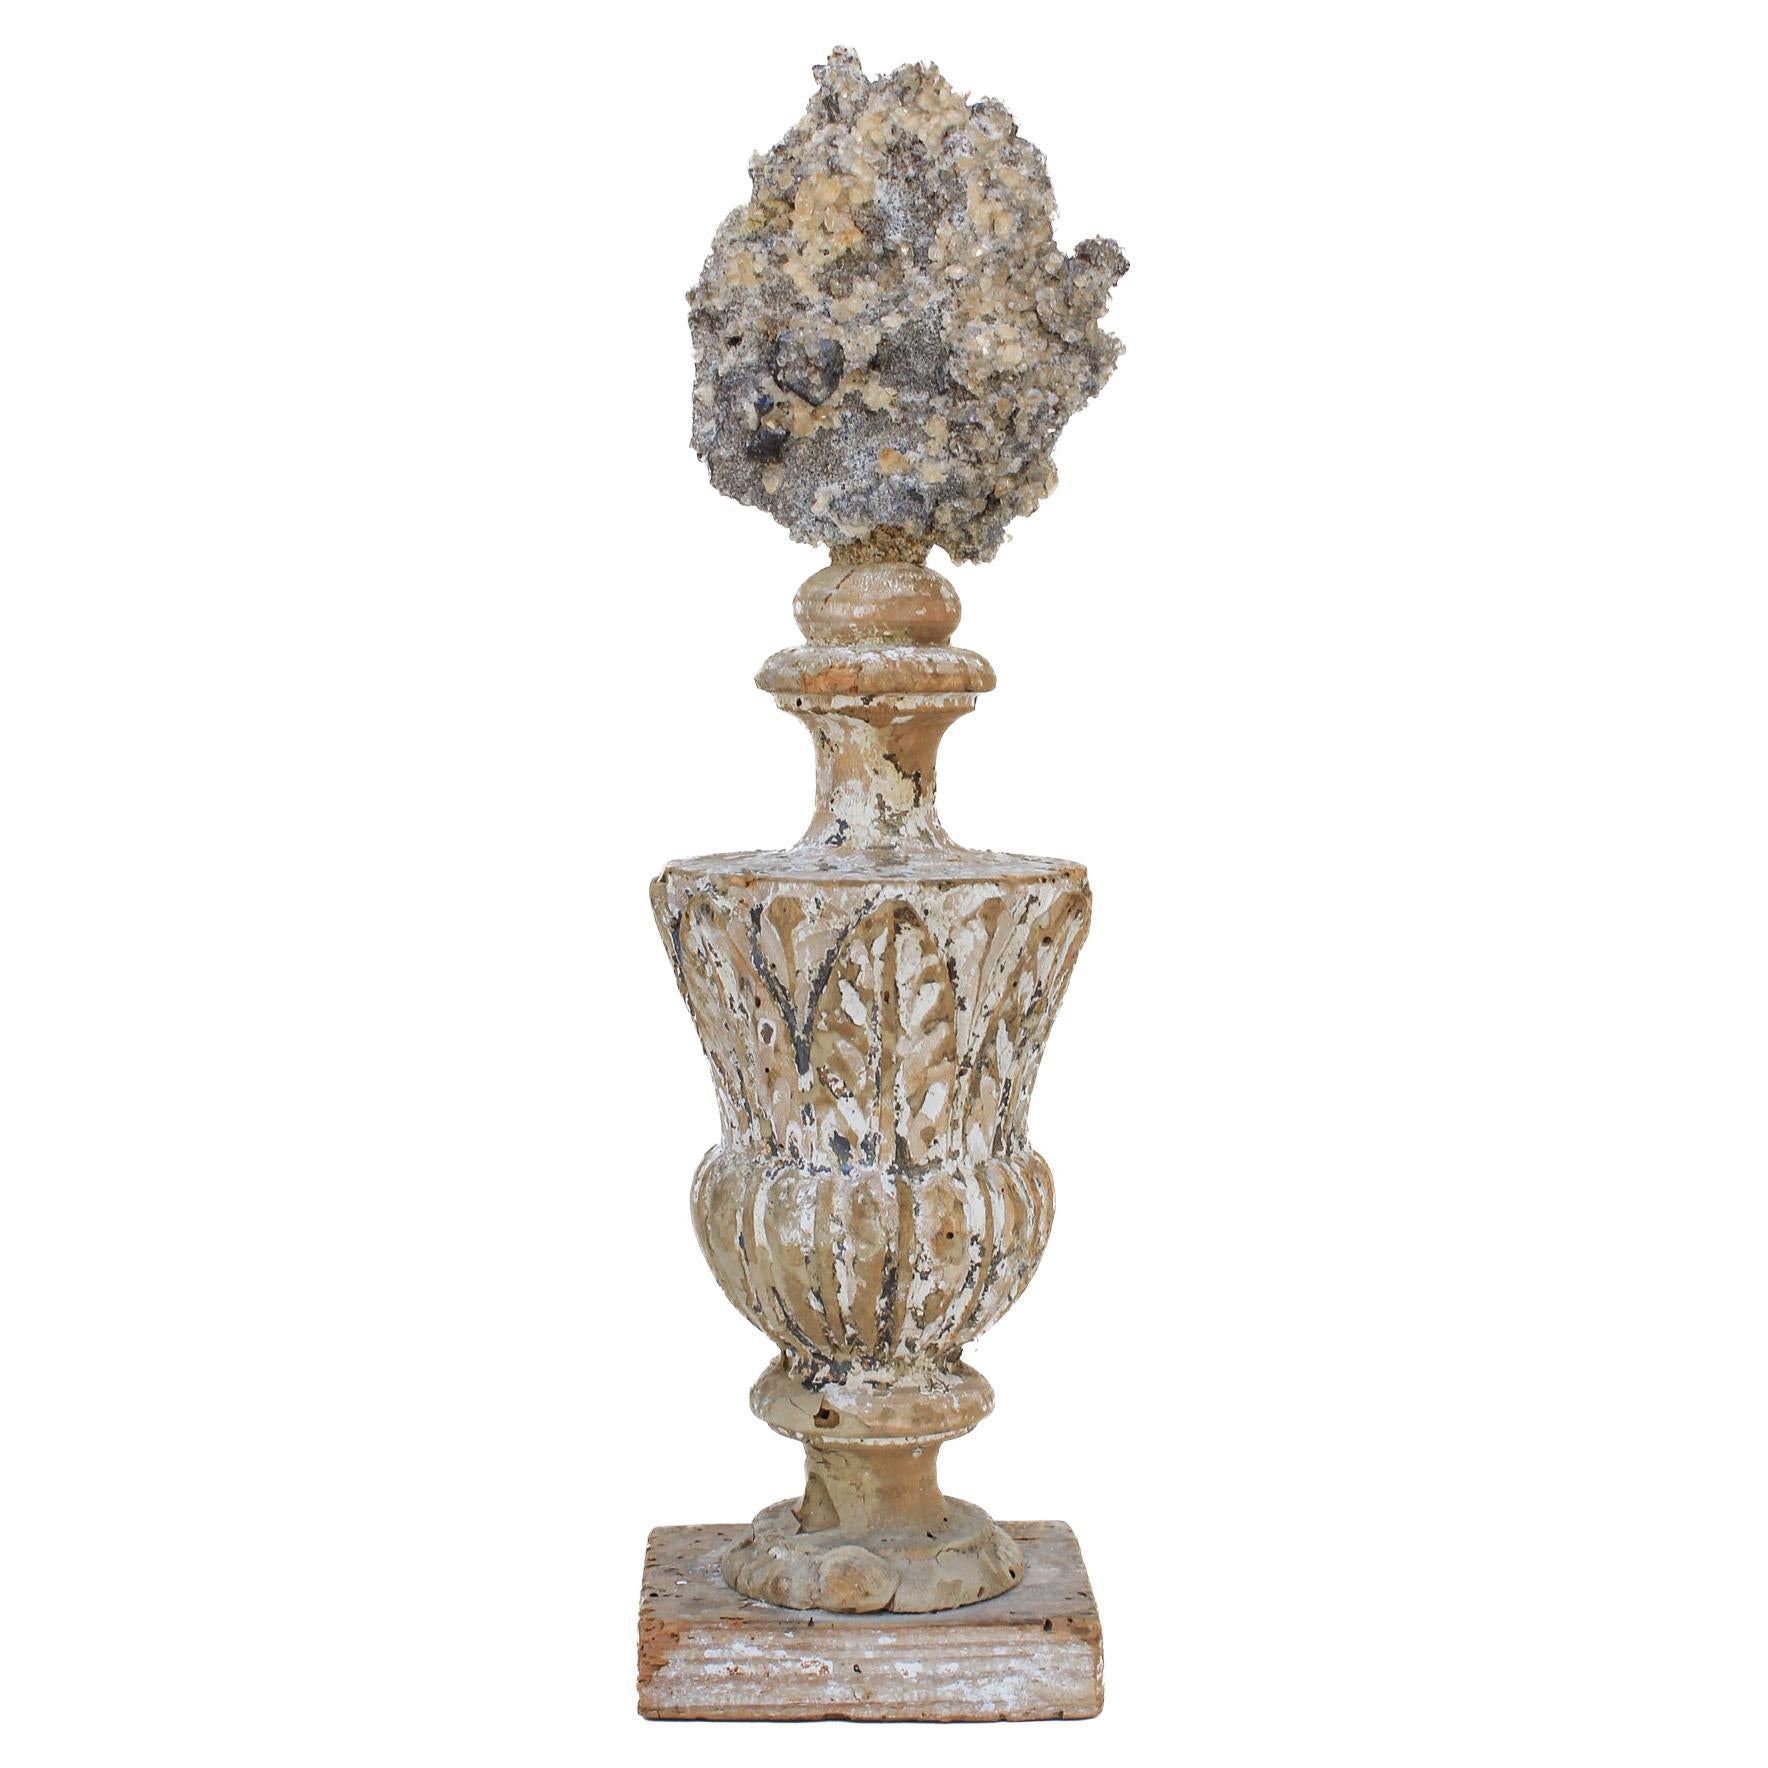 17th Century 'Florence Fragment' Vase with Calcite Crystals & Sphalerite